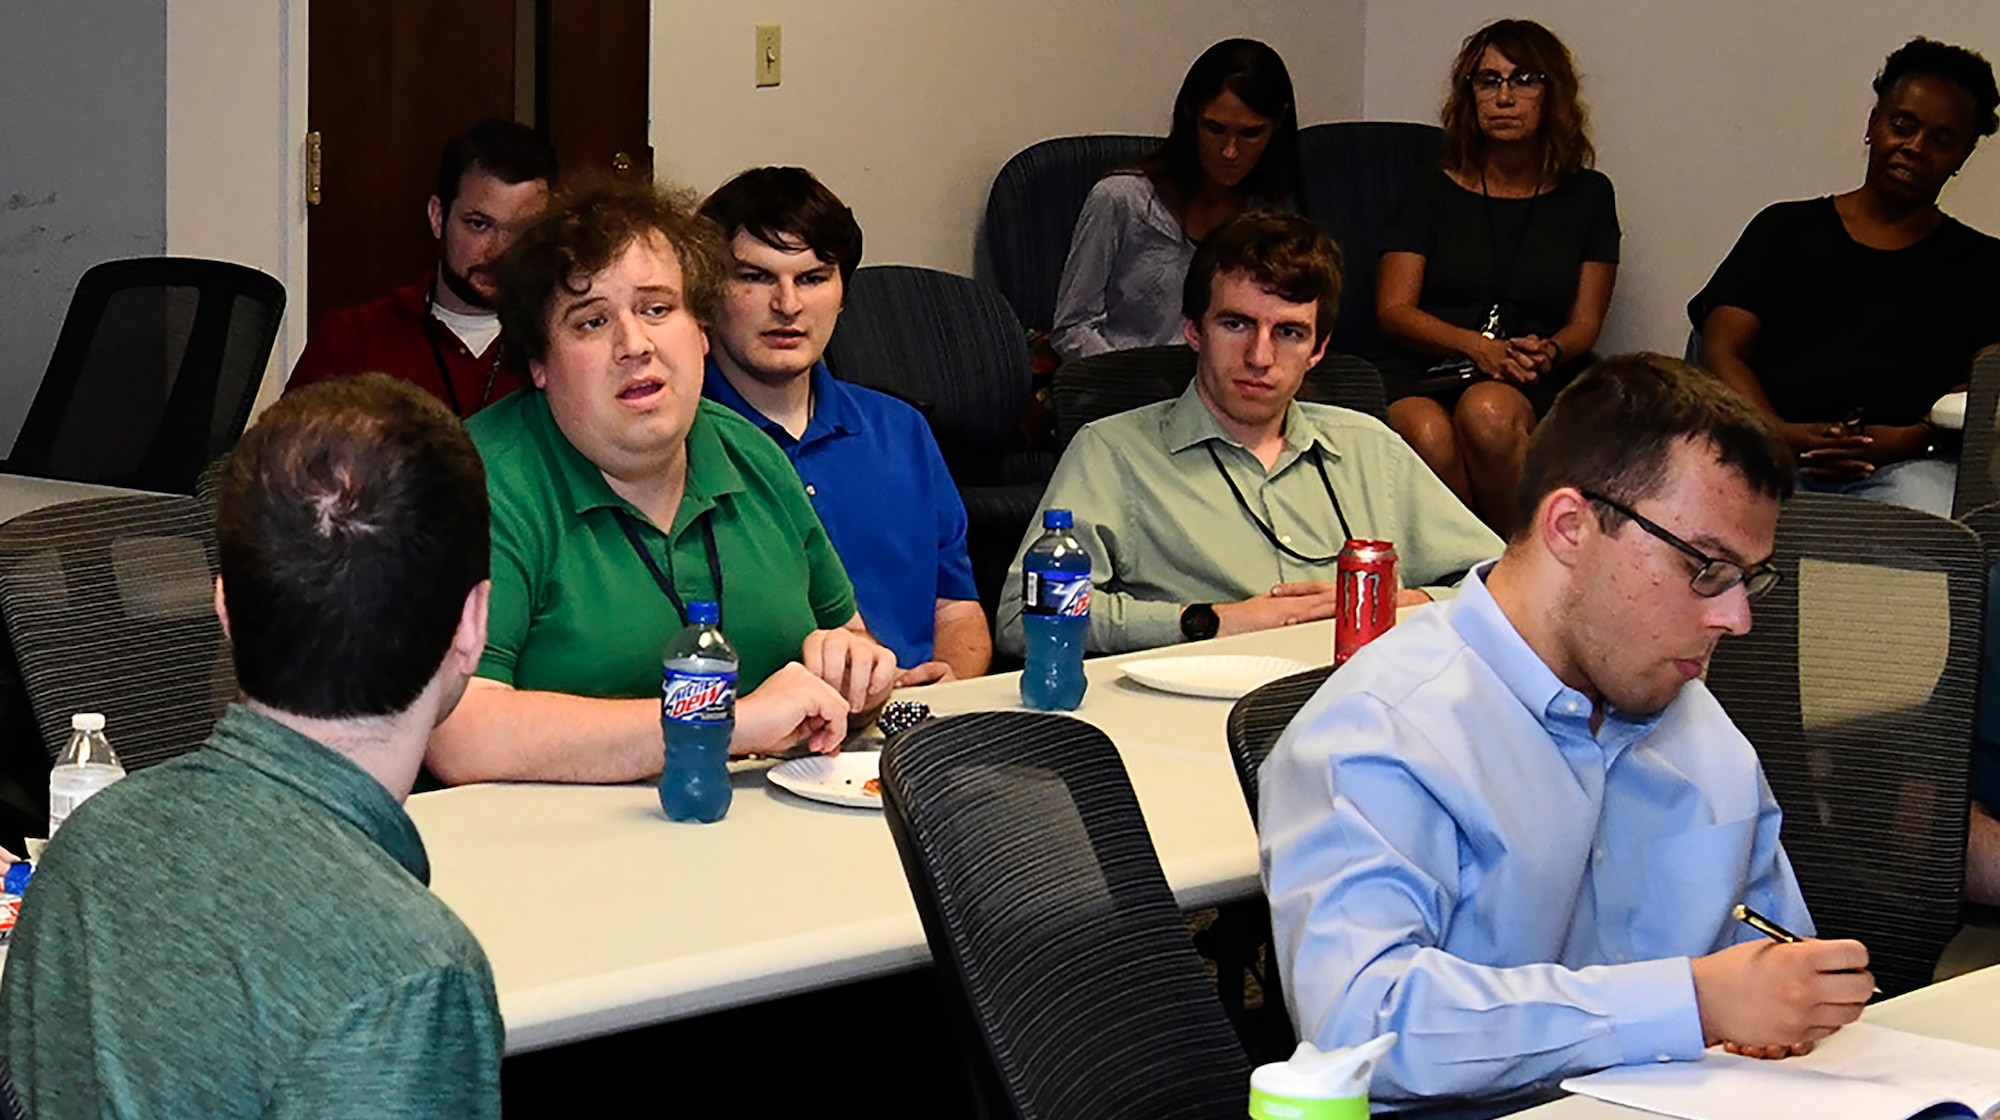 "Autism At Work" group meets at lunch-in to discuss strategies and policies of the workforce at Wright-Patterson Air Force Base, on July 23 2019.  (U.S. Air Force photo / Darrius A. Parker)